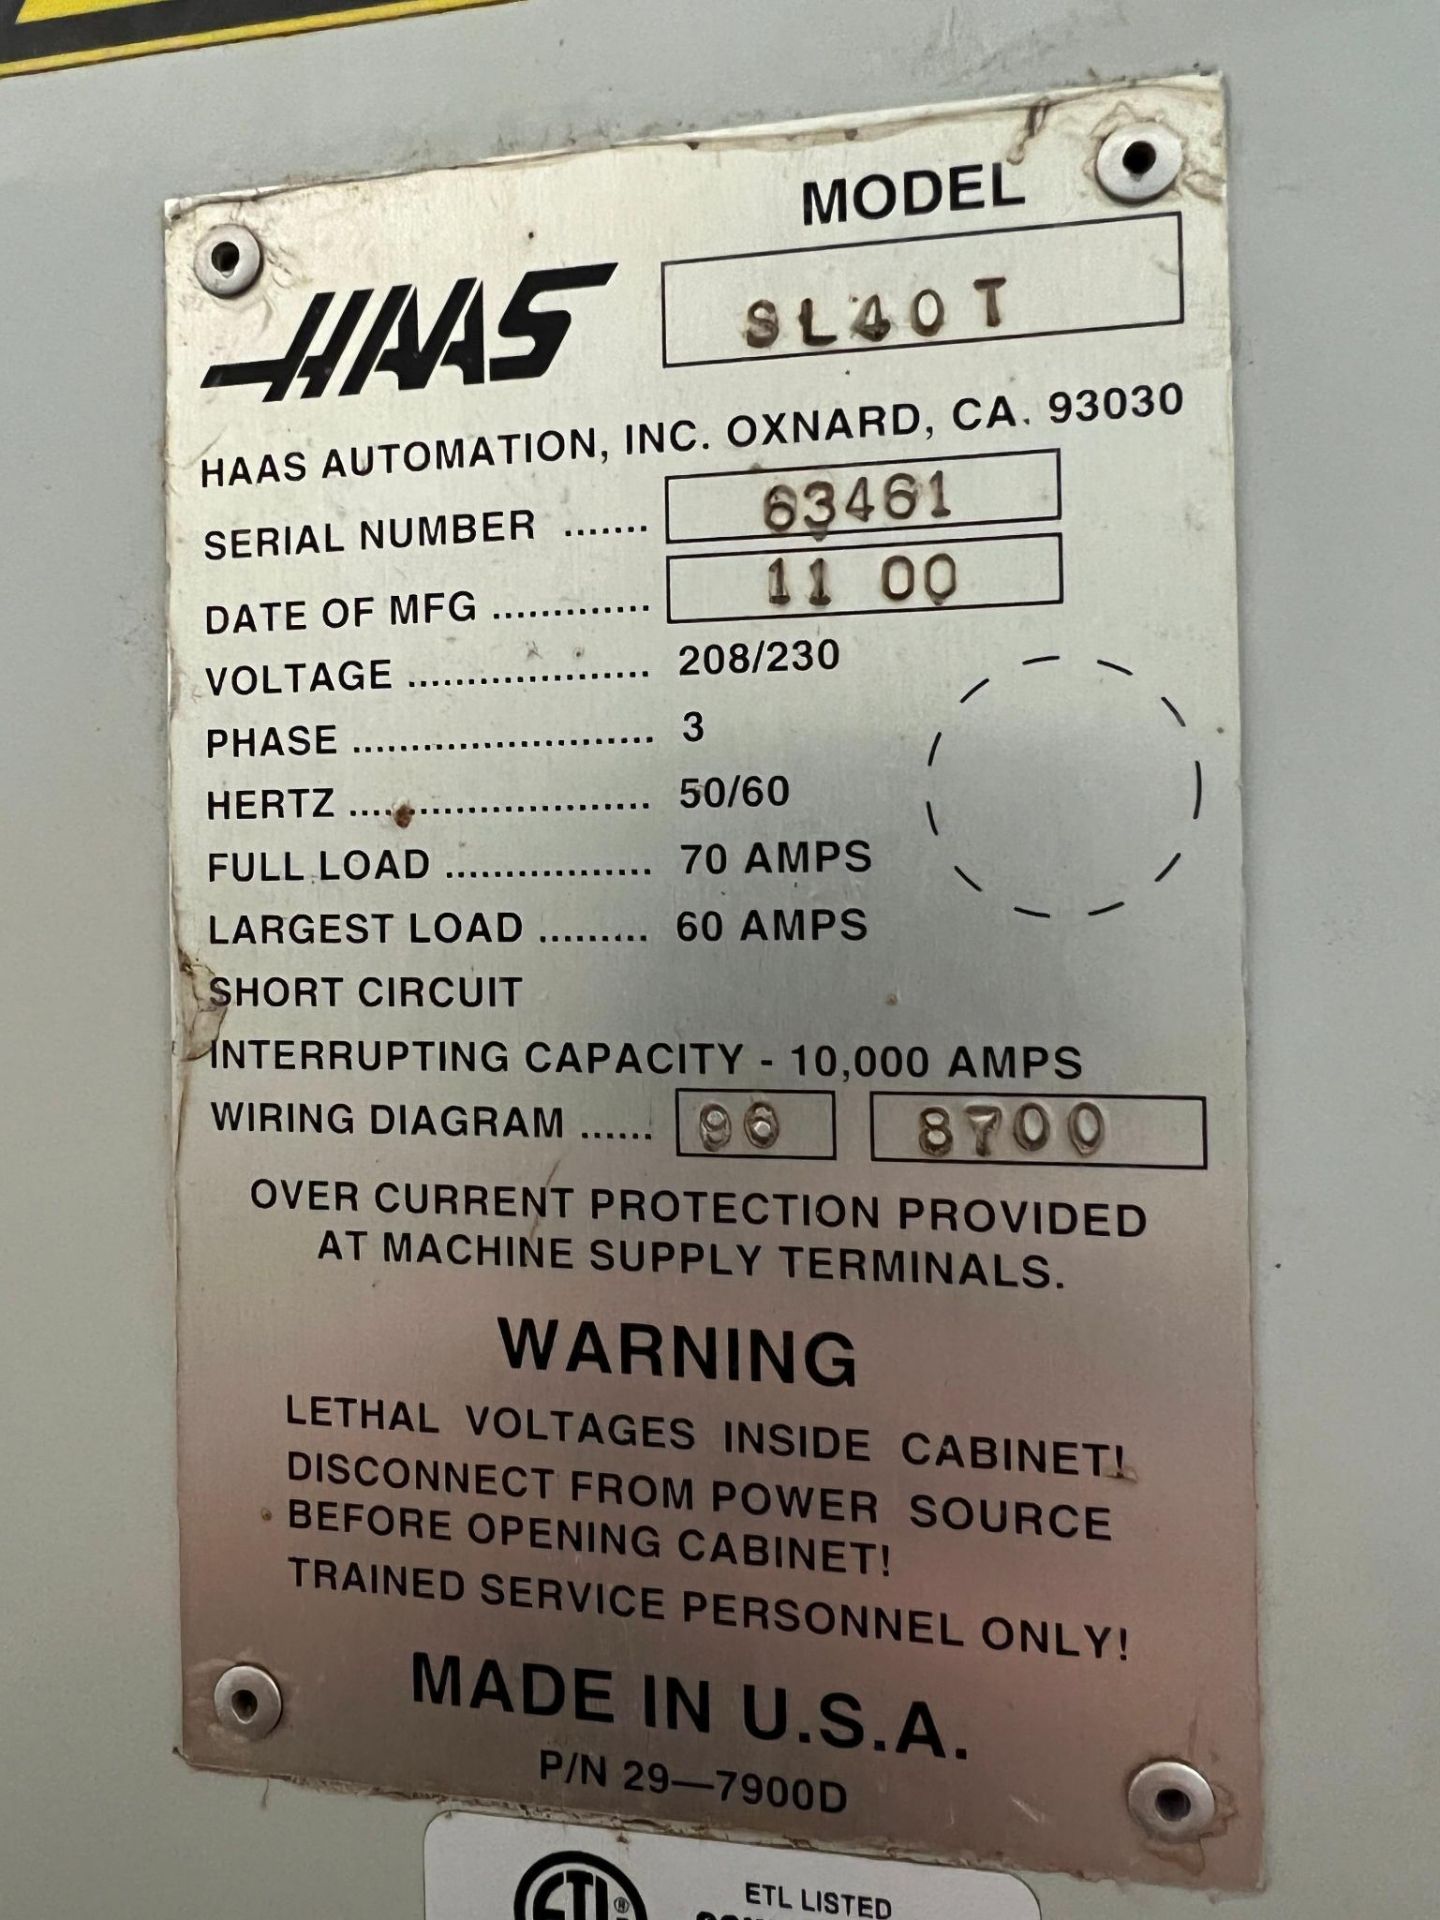 2000 Haas SL-40T CNC Lathe Serial Number: 63461 2-Axis Machine w/ programmable tailstock Bar Capacit - Image 17 of 28